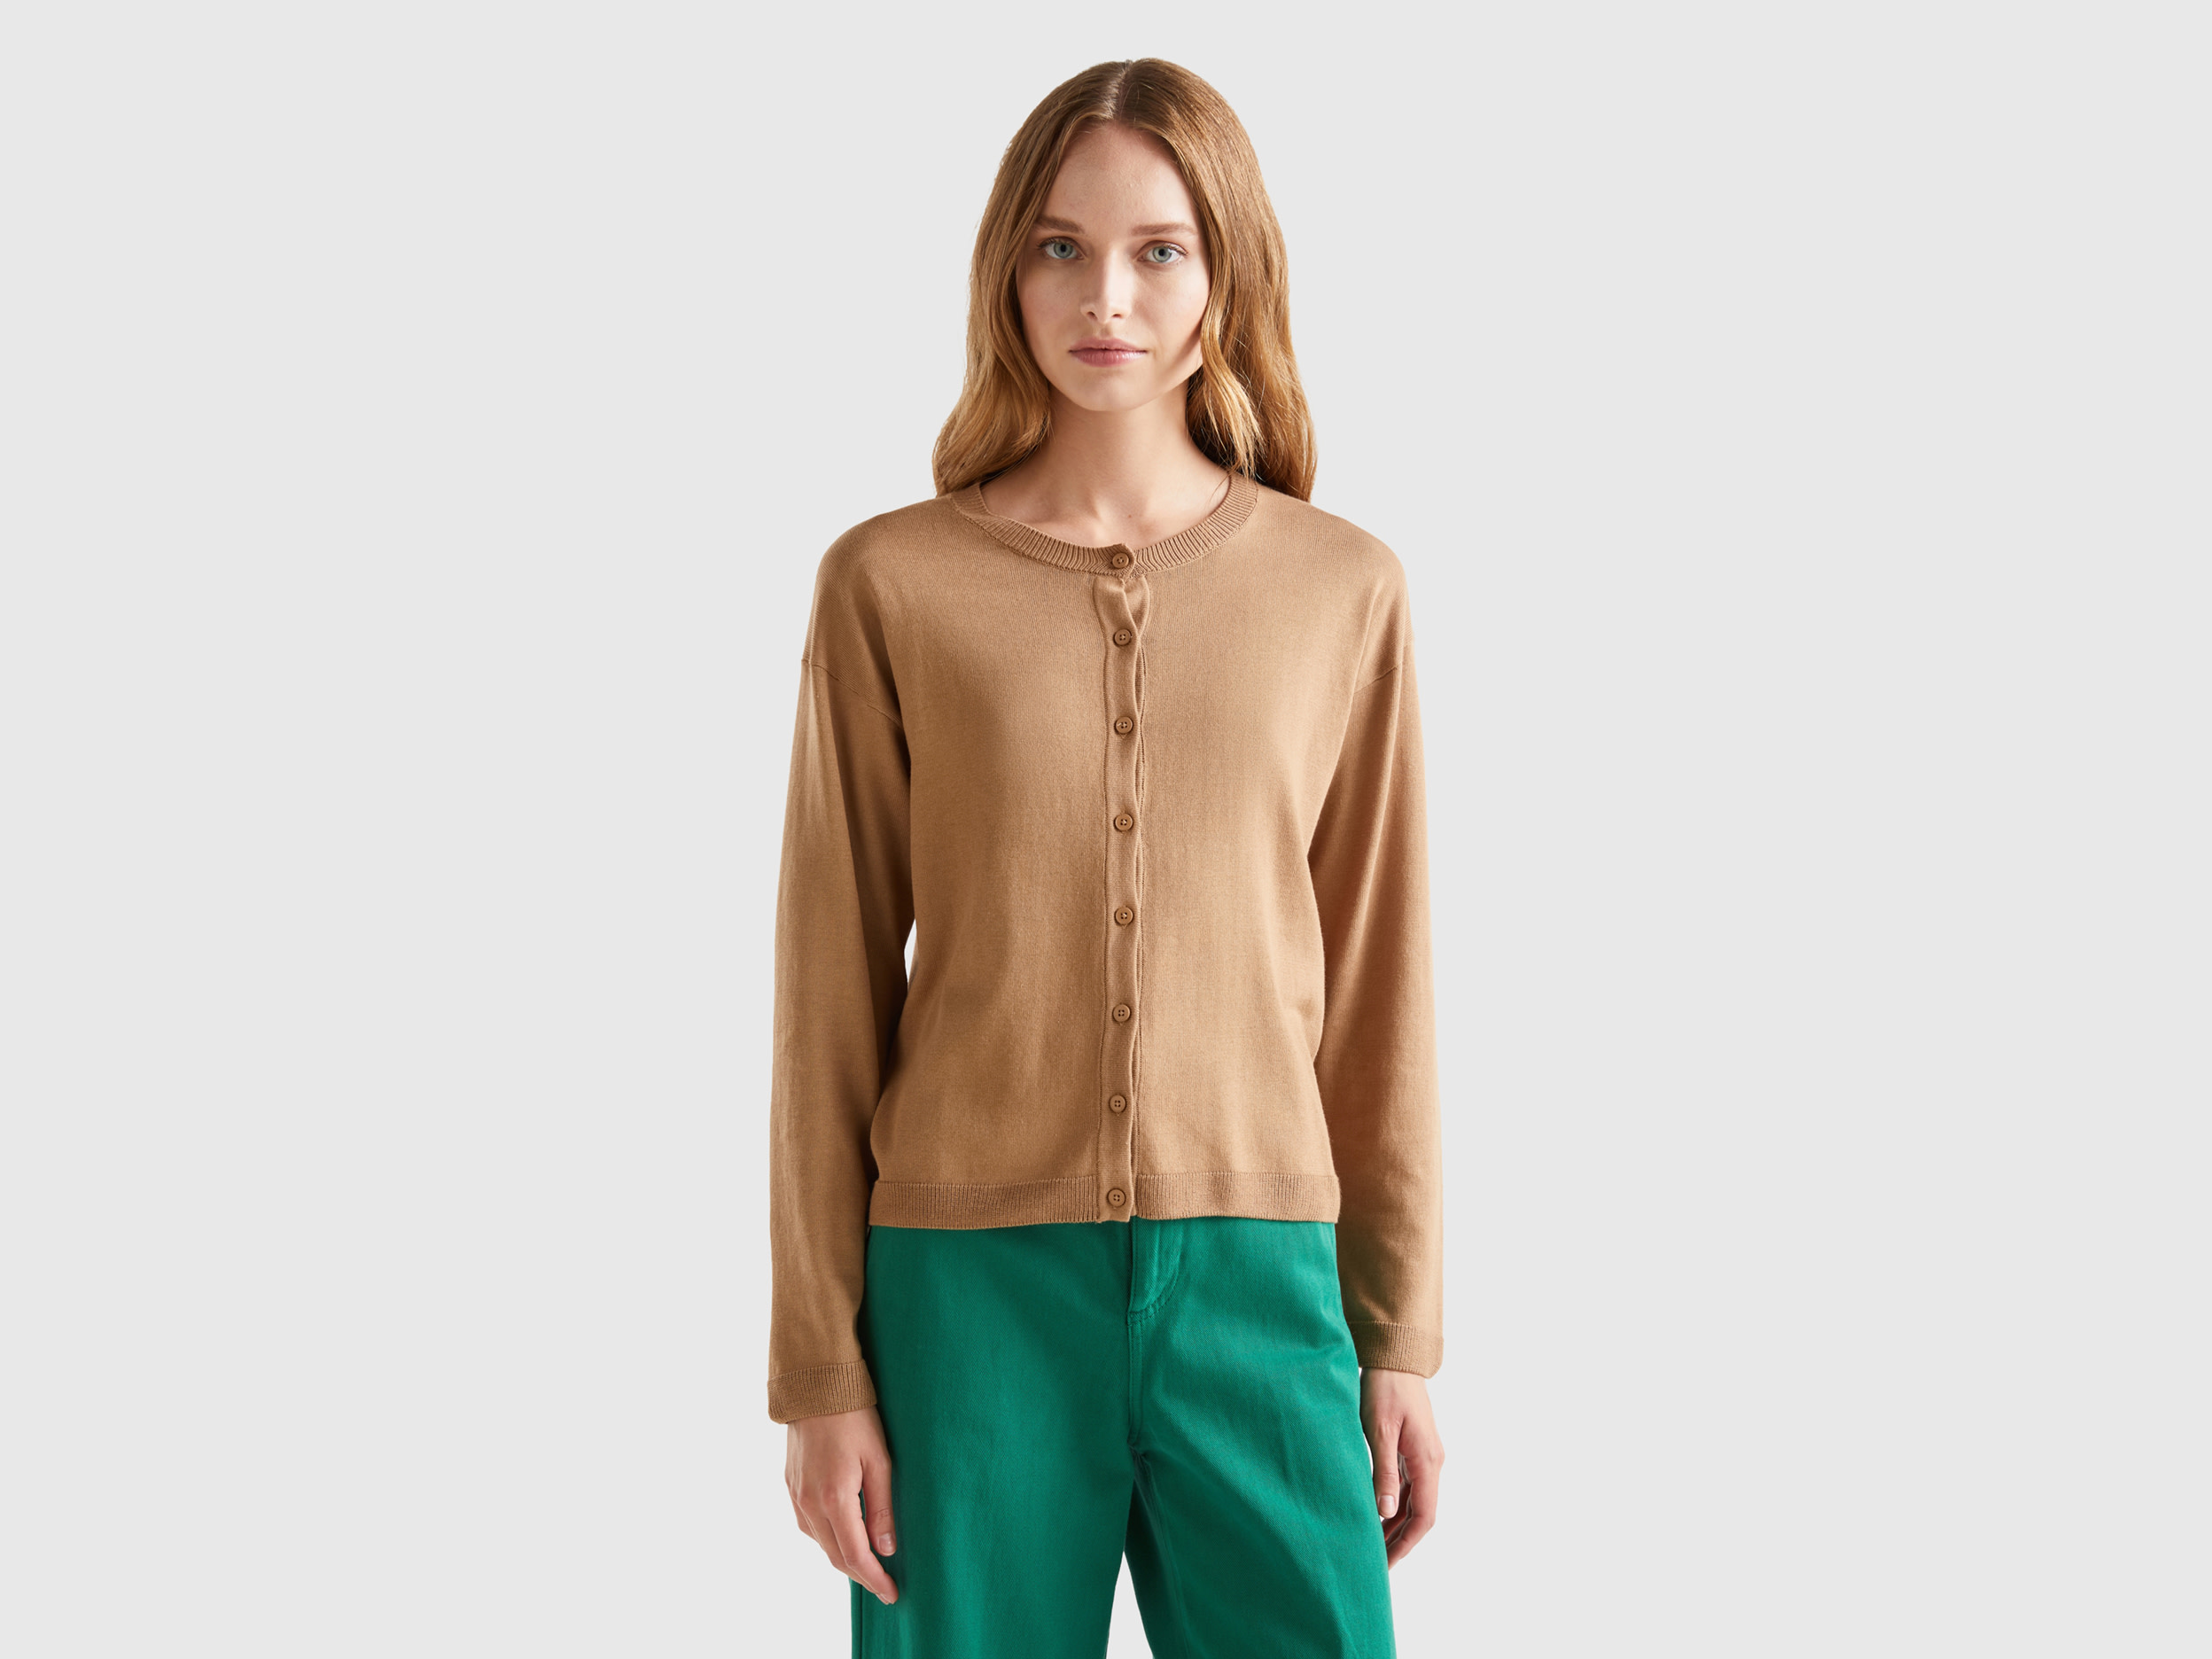 Benetton, Crew Neck Cardigan With Buttons, size L, Camel, Women